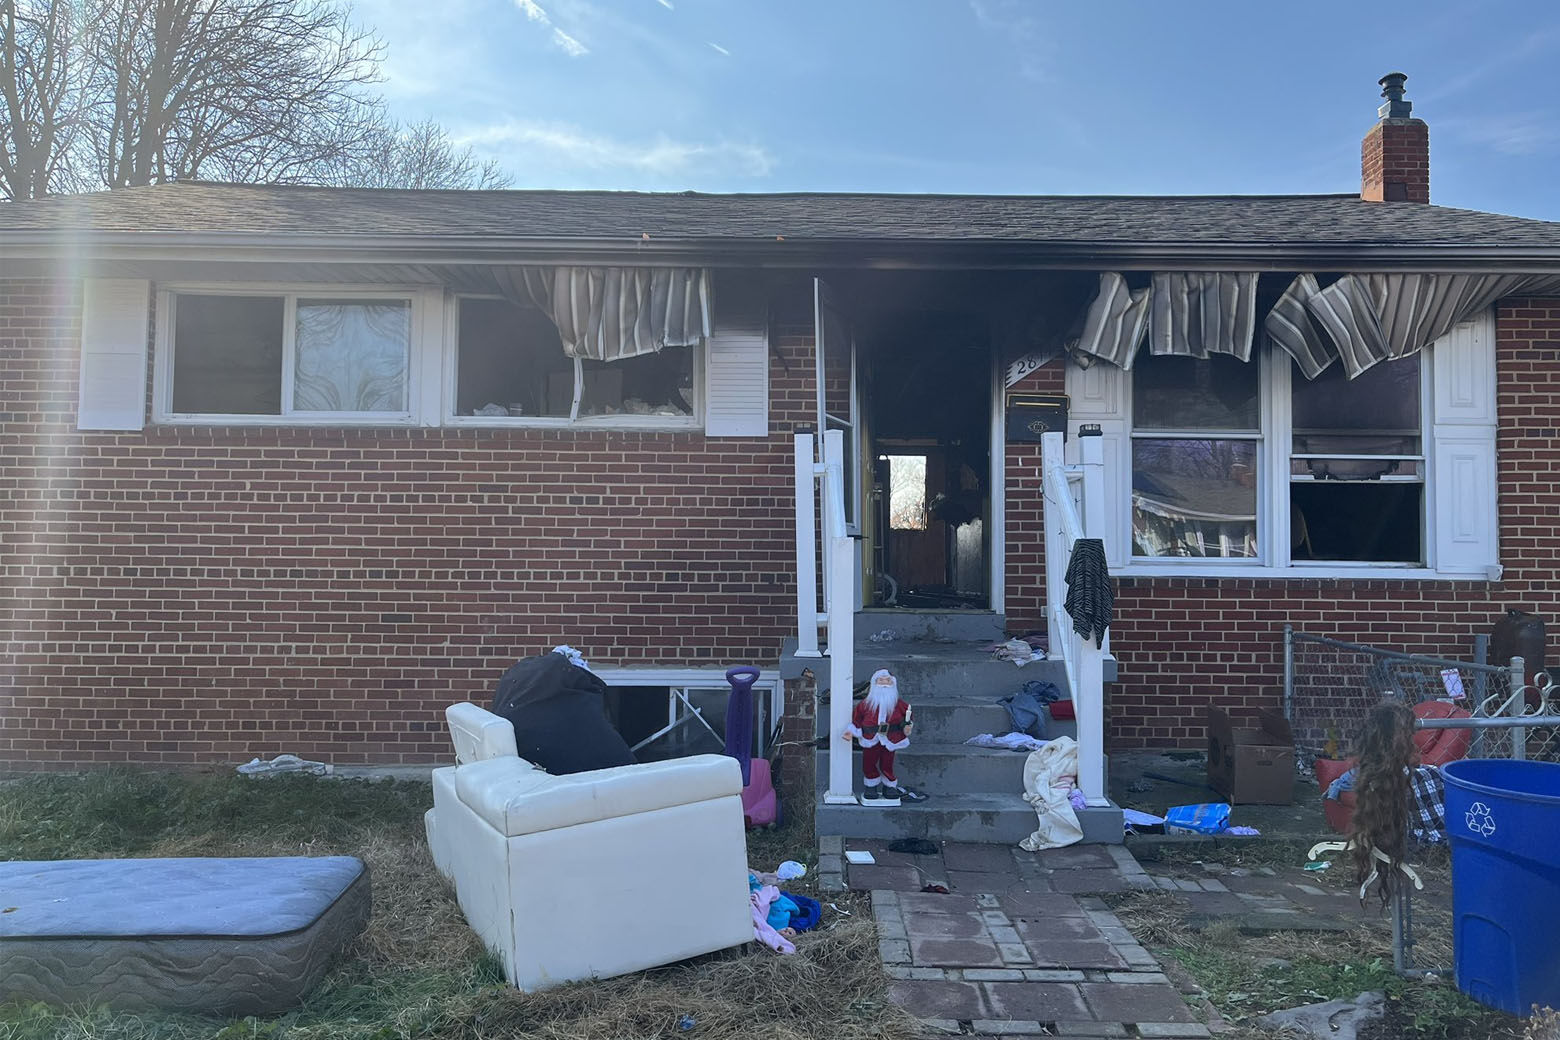 A fire that broke out in a home in Montgomery County, Maryland, Thursday night displaced 17 people — including five children — and a "person of interest" has been questioned by police, authorities said. (Courtesy Montgomery County Fire and Rescue Service)